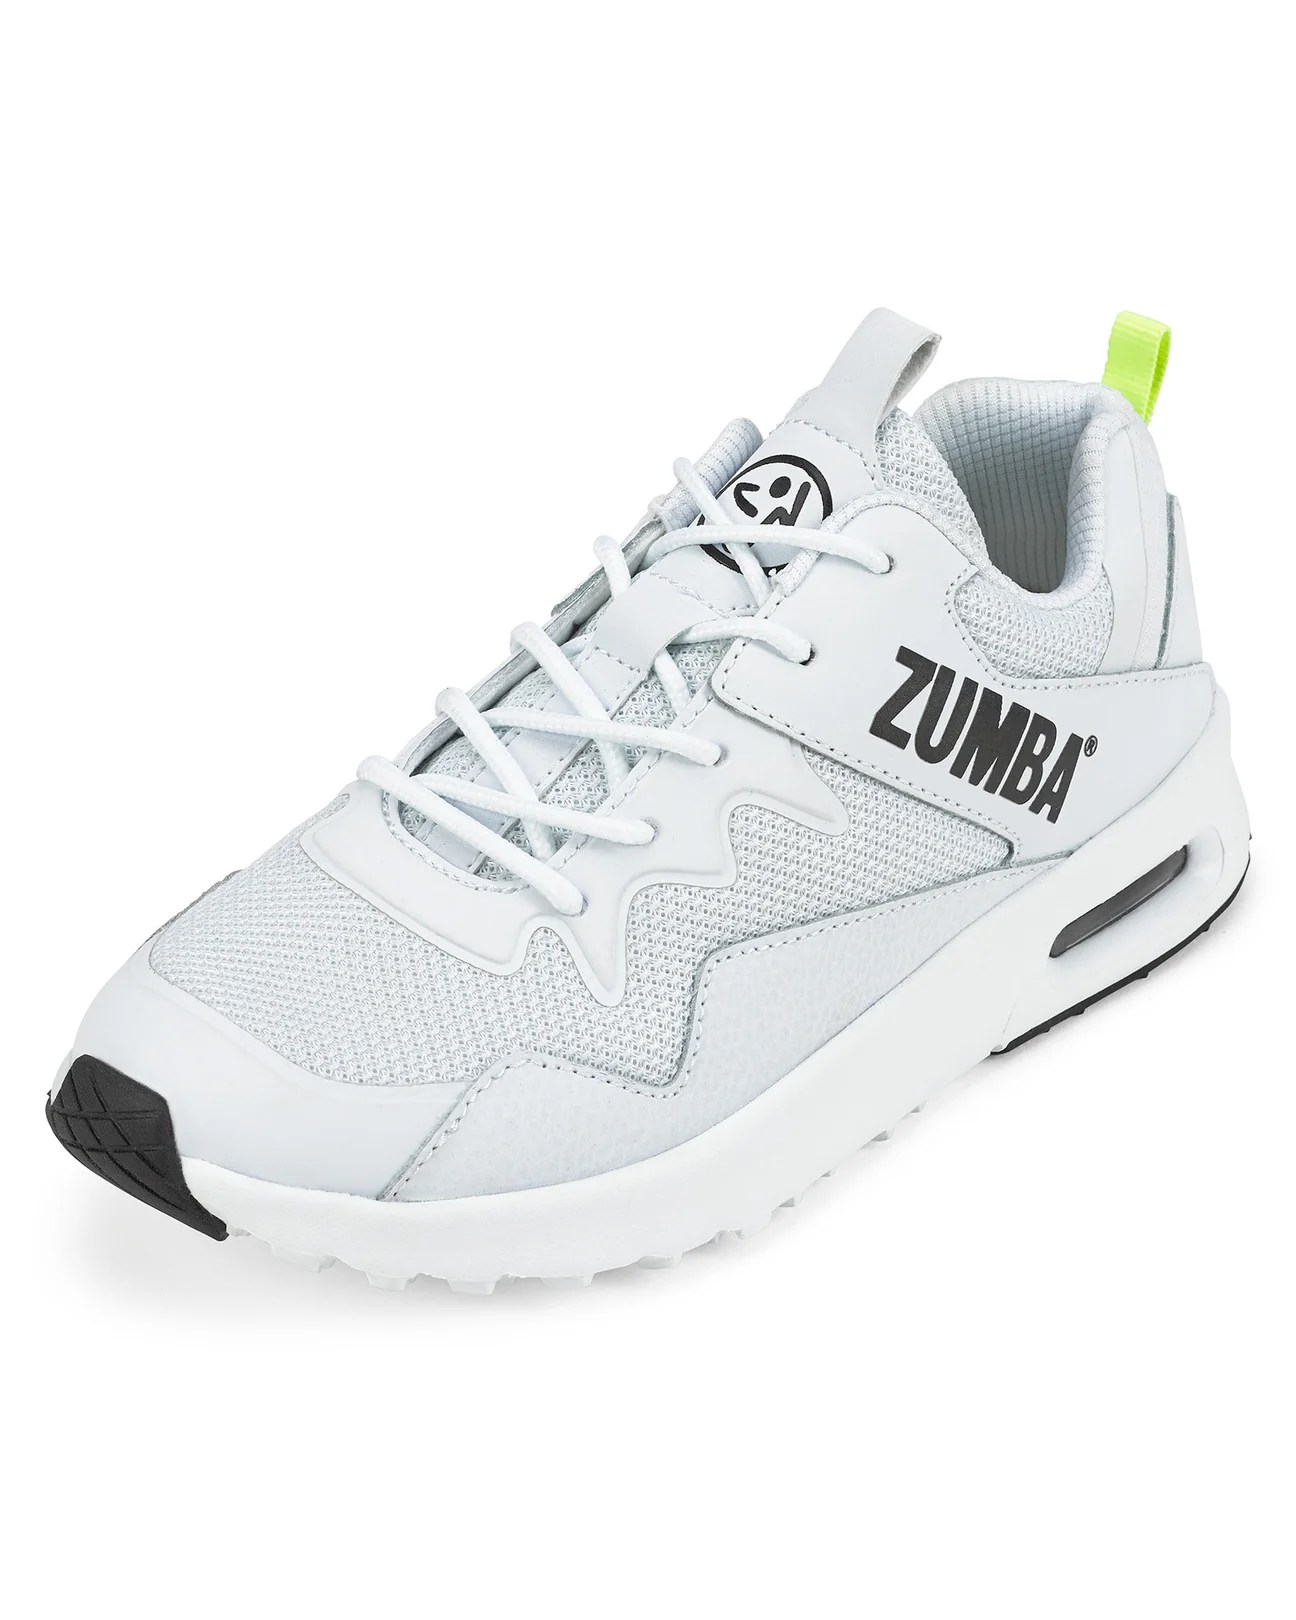 12 Best Shoes for Zumba, According to Zumba Instructors 2023